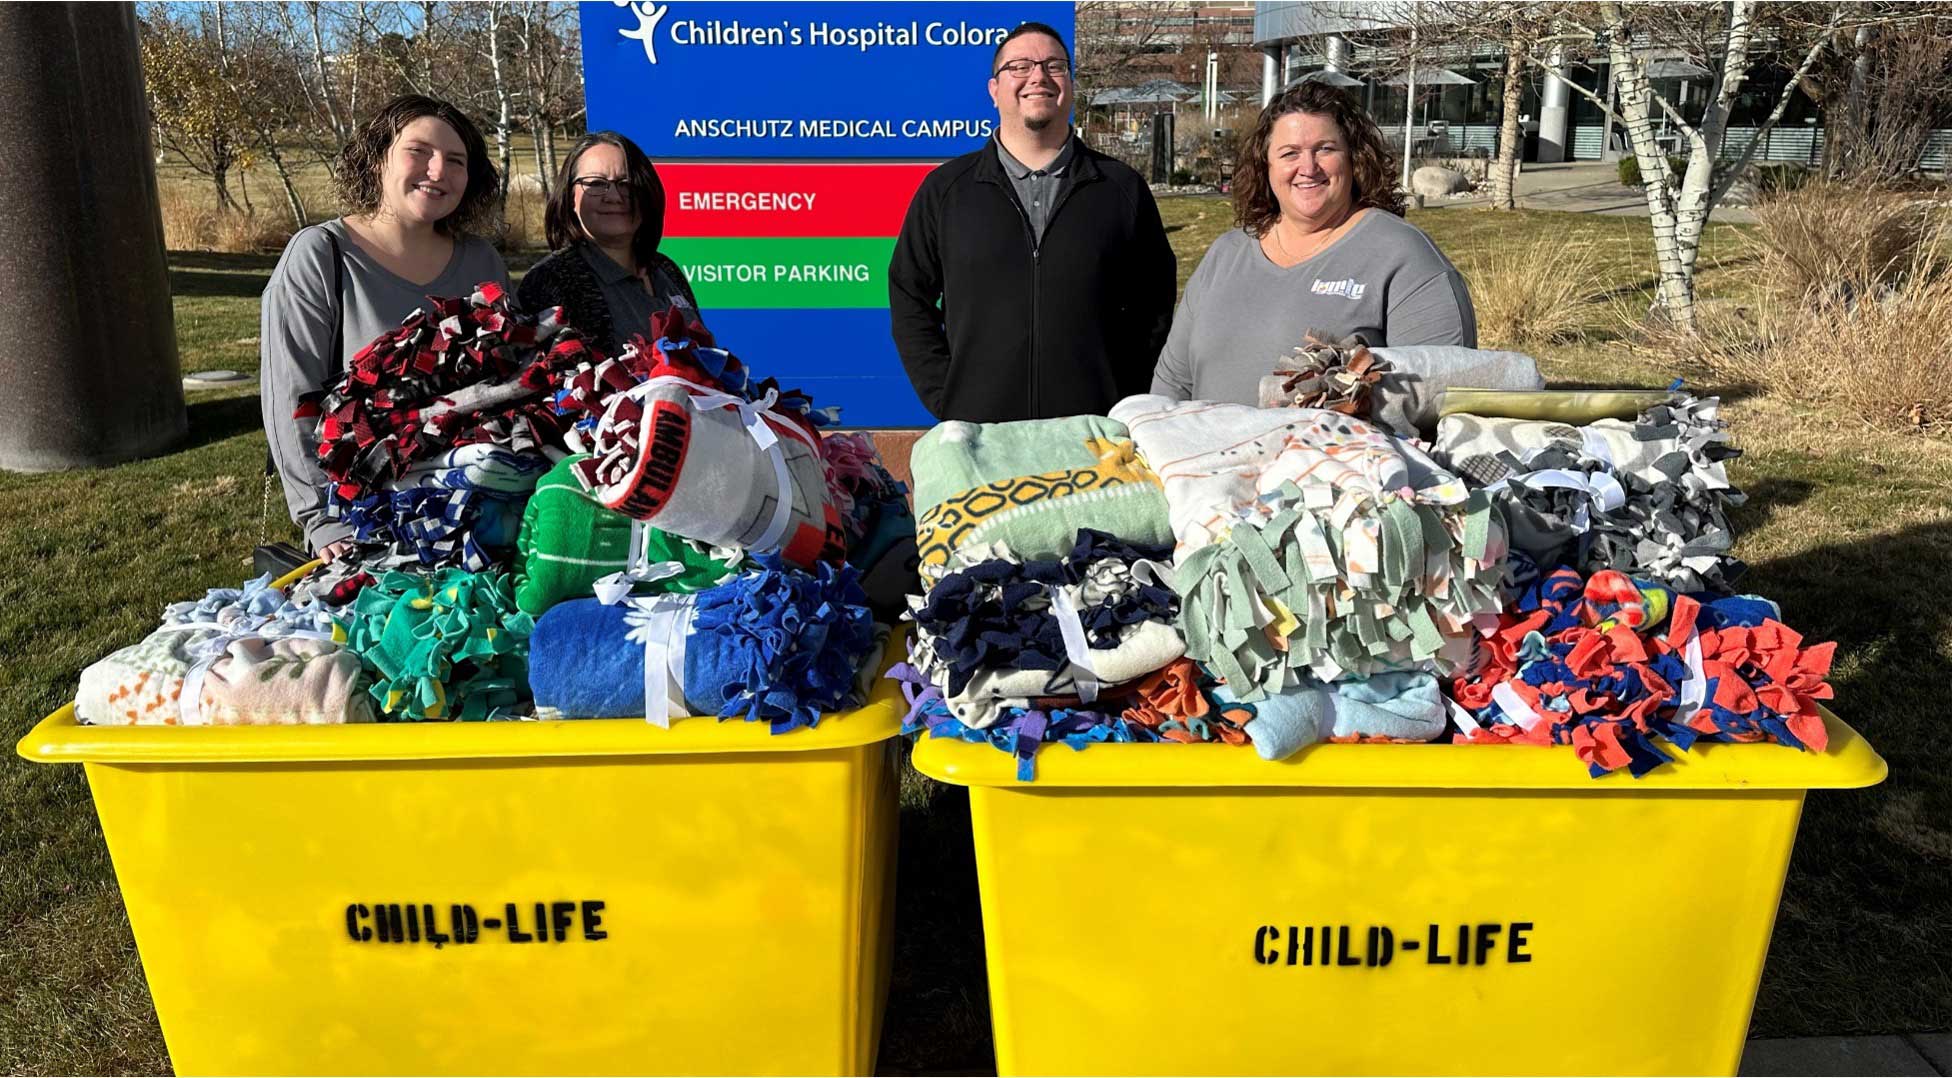 Blankets for the Children’s Hospital Colorado 